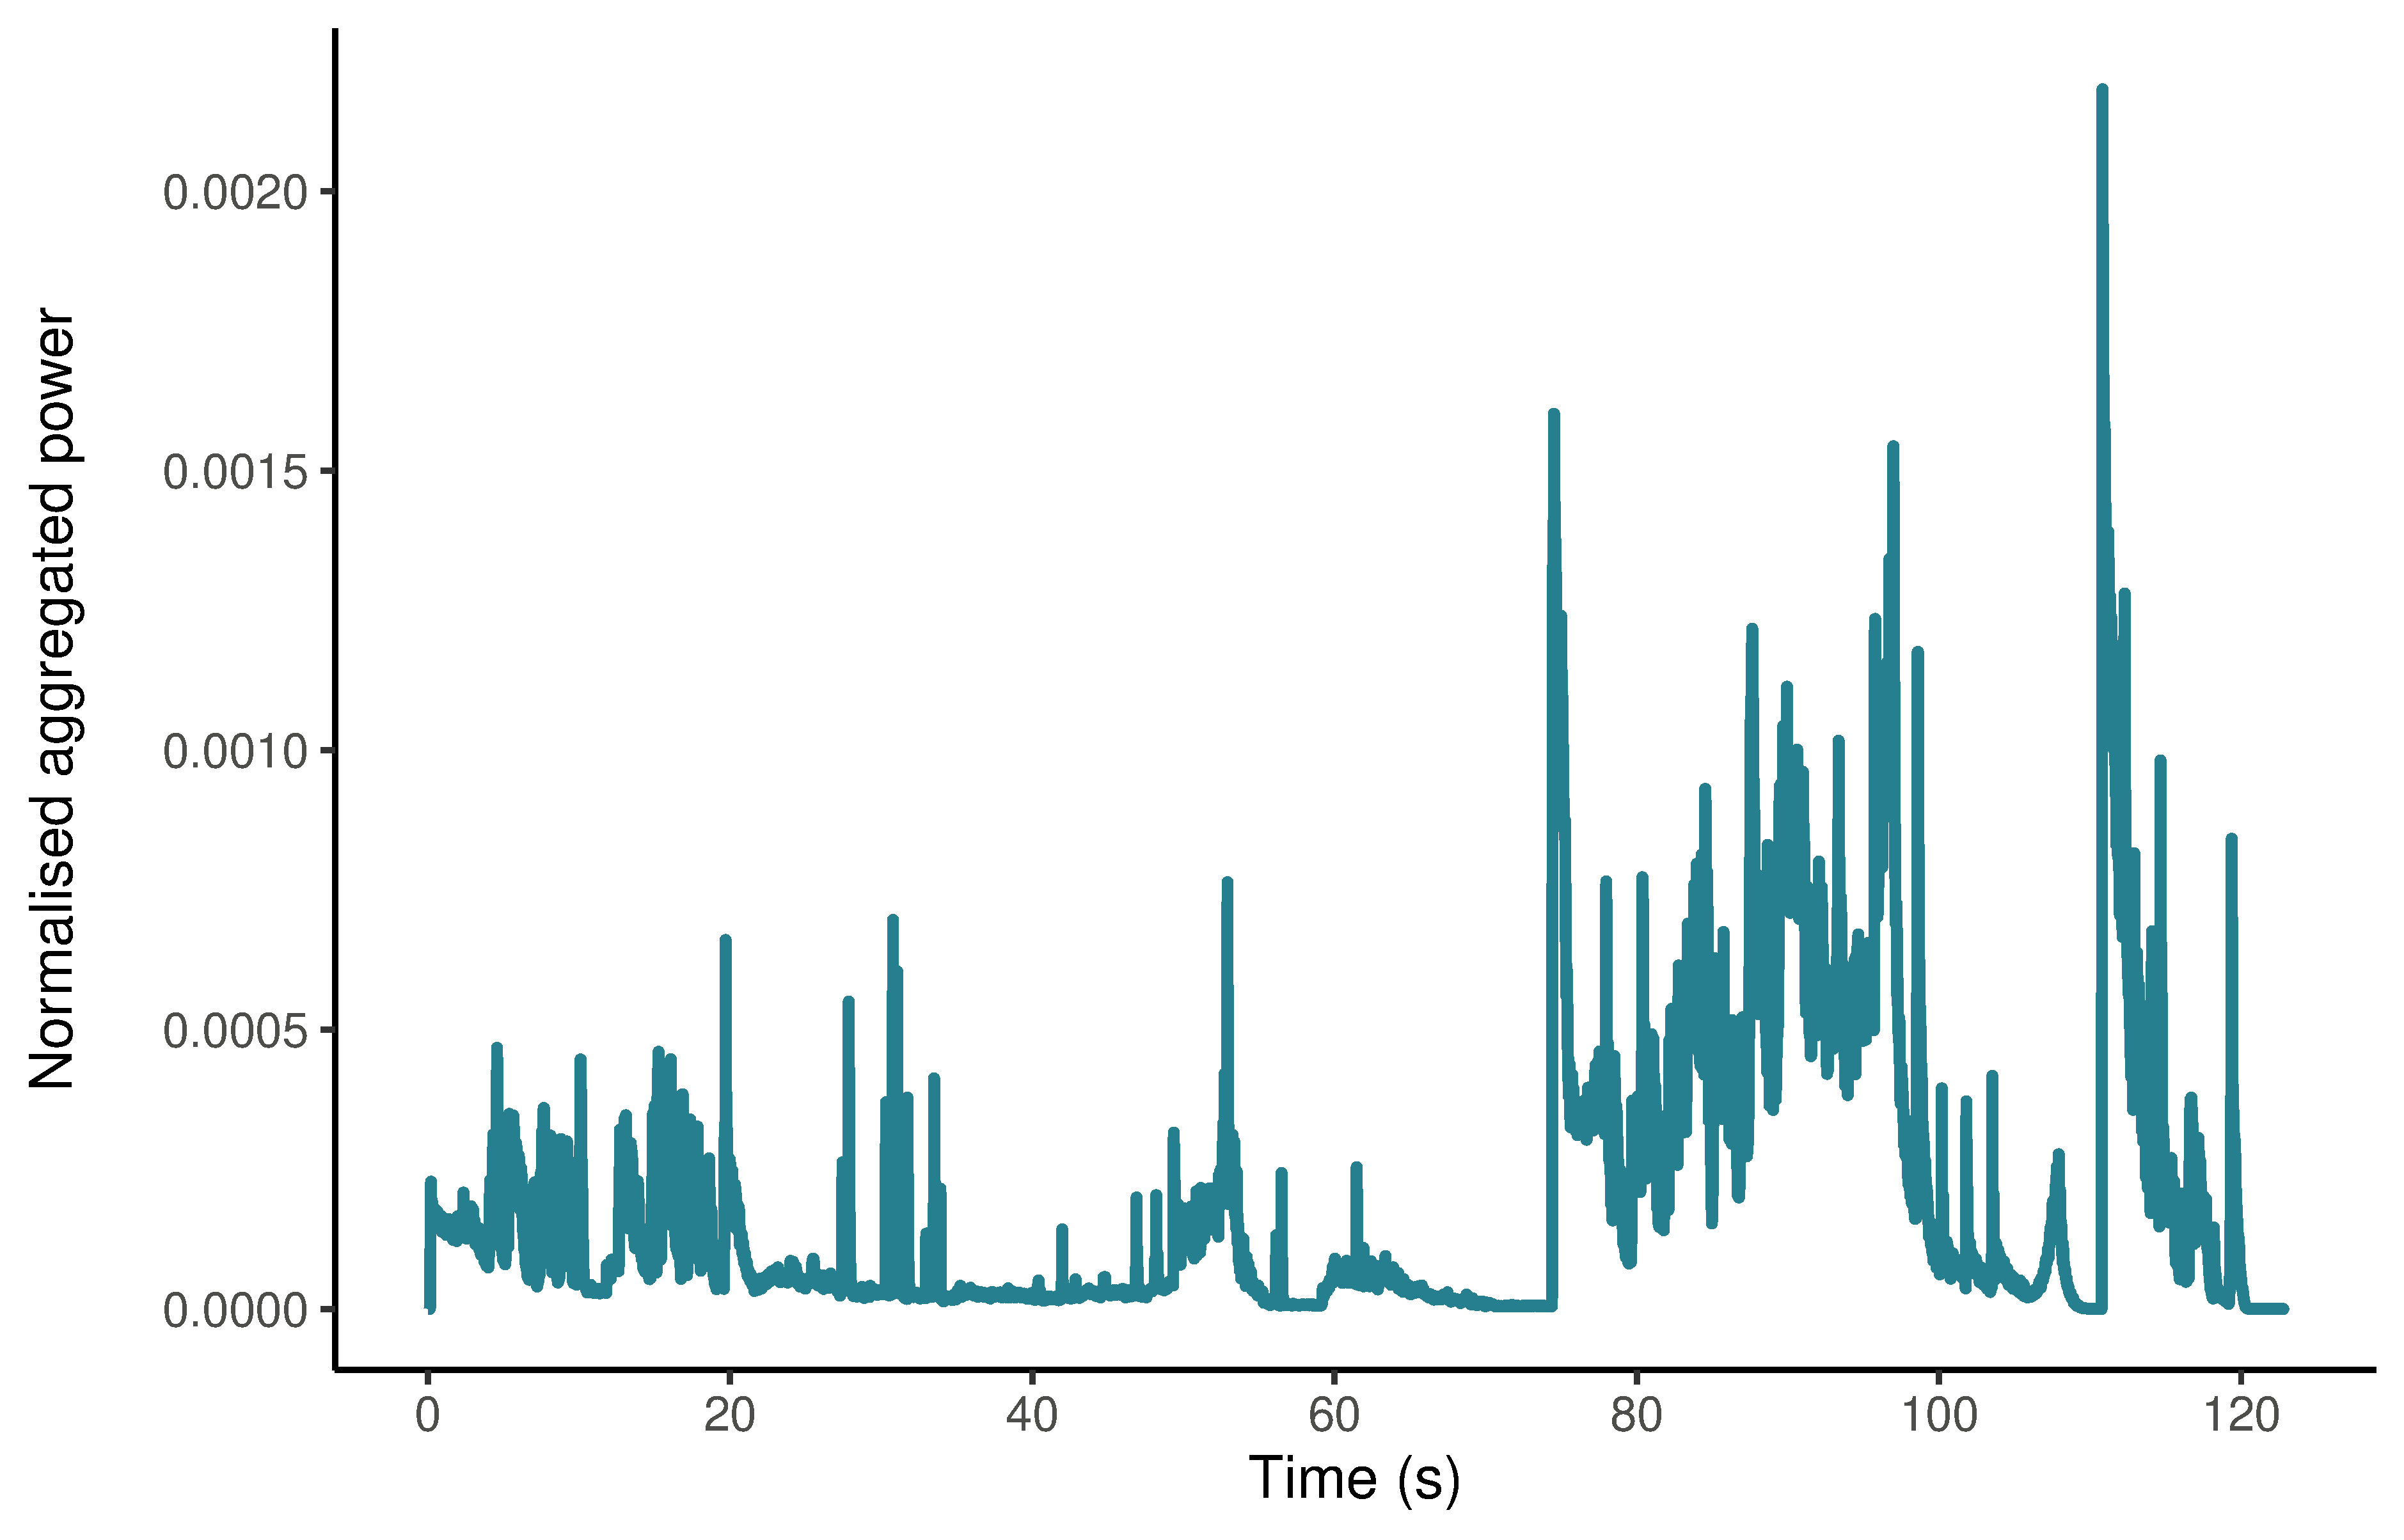 The normalised aggregated power envelope of the soundtrack of the trailer for *Insidious: Chapter 3*.